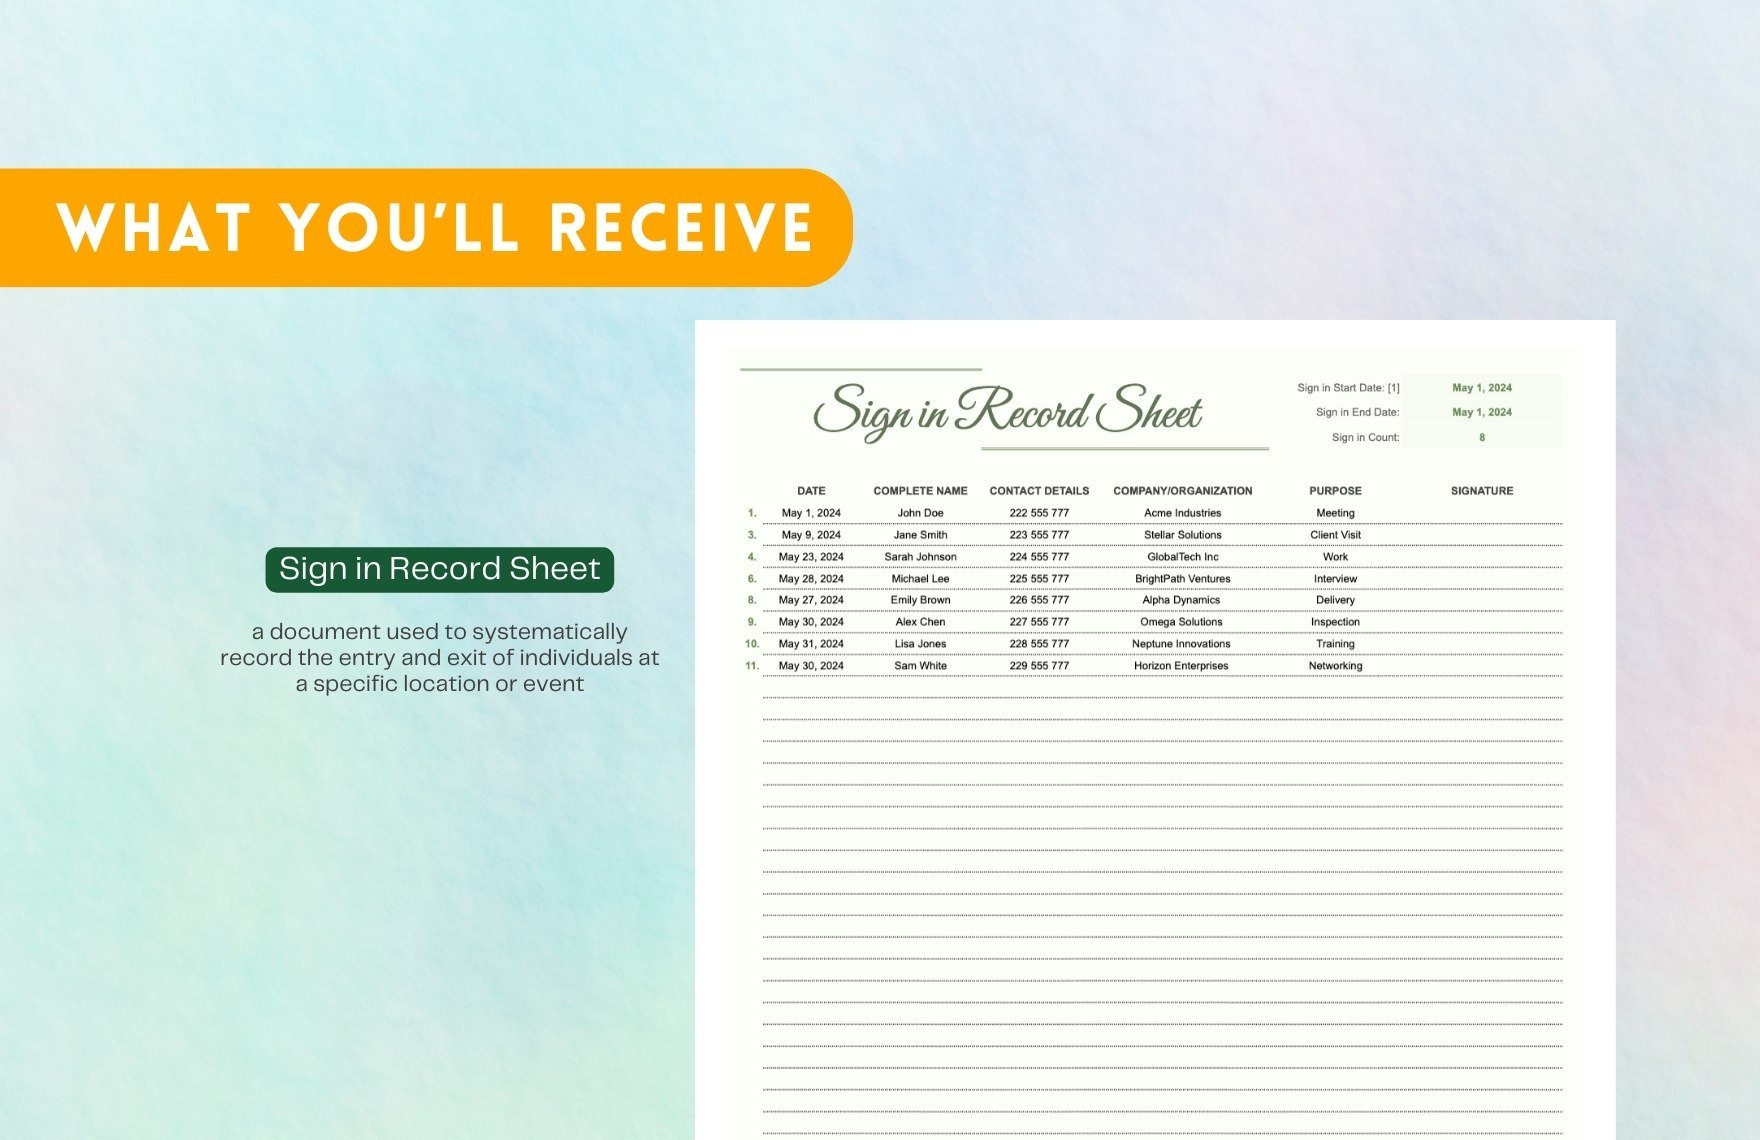 Sign in Record Sheet Template